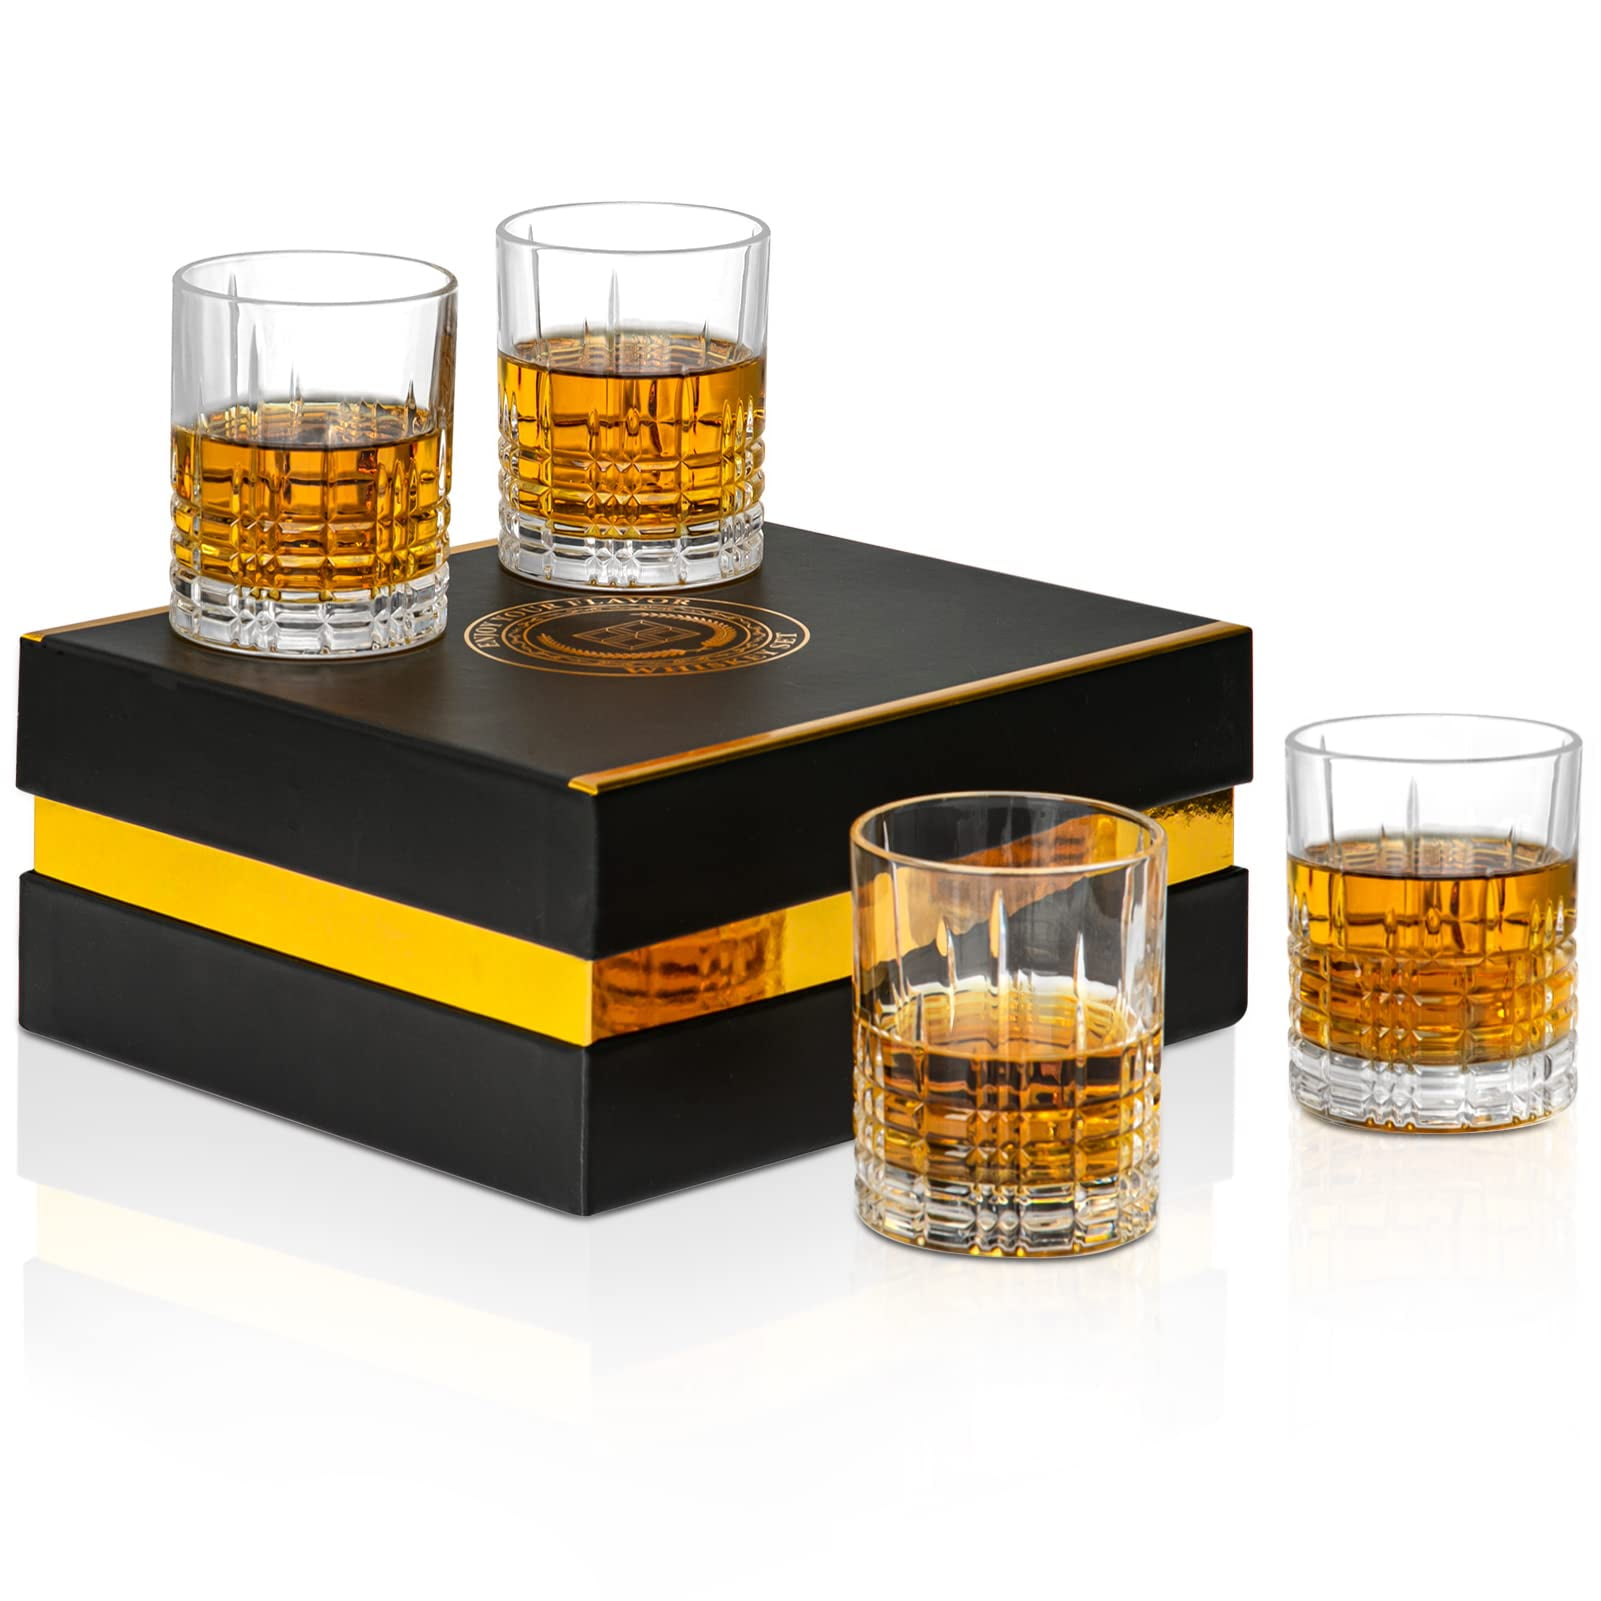 OPAYLY Whiskey Glasses Set of 410 oz Premium Old Fashioned Glass TumblerLiquor Crystal Rocks Glasses with Gift BoxClassic Rocks Glasses for Cognac